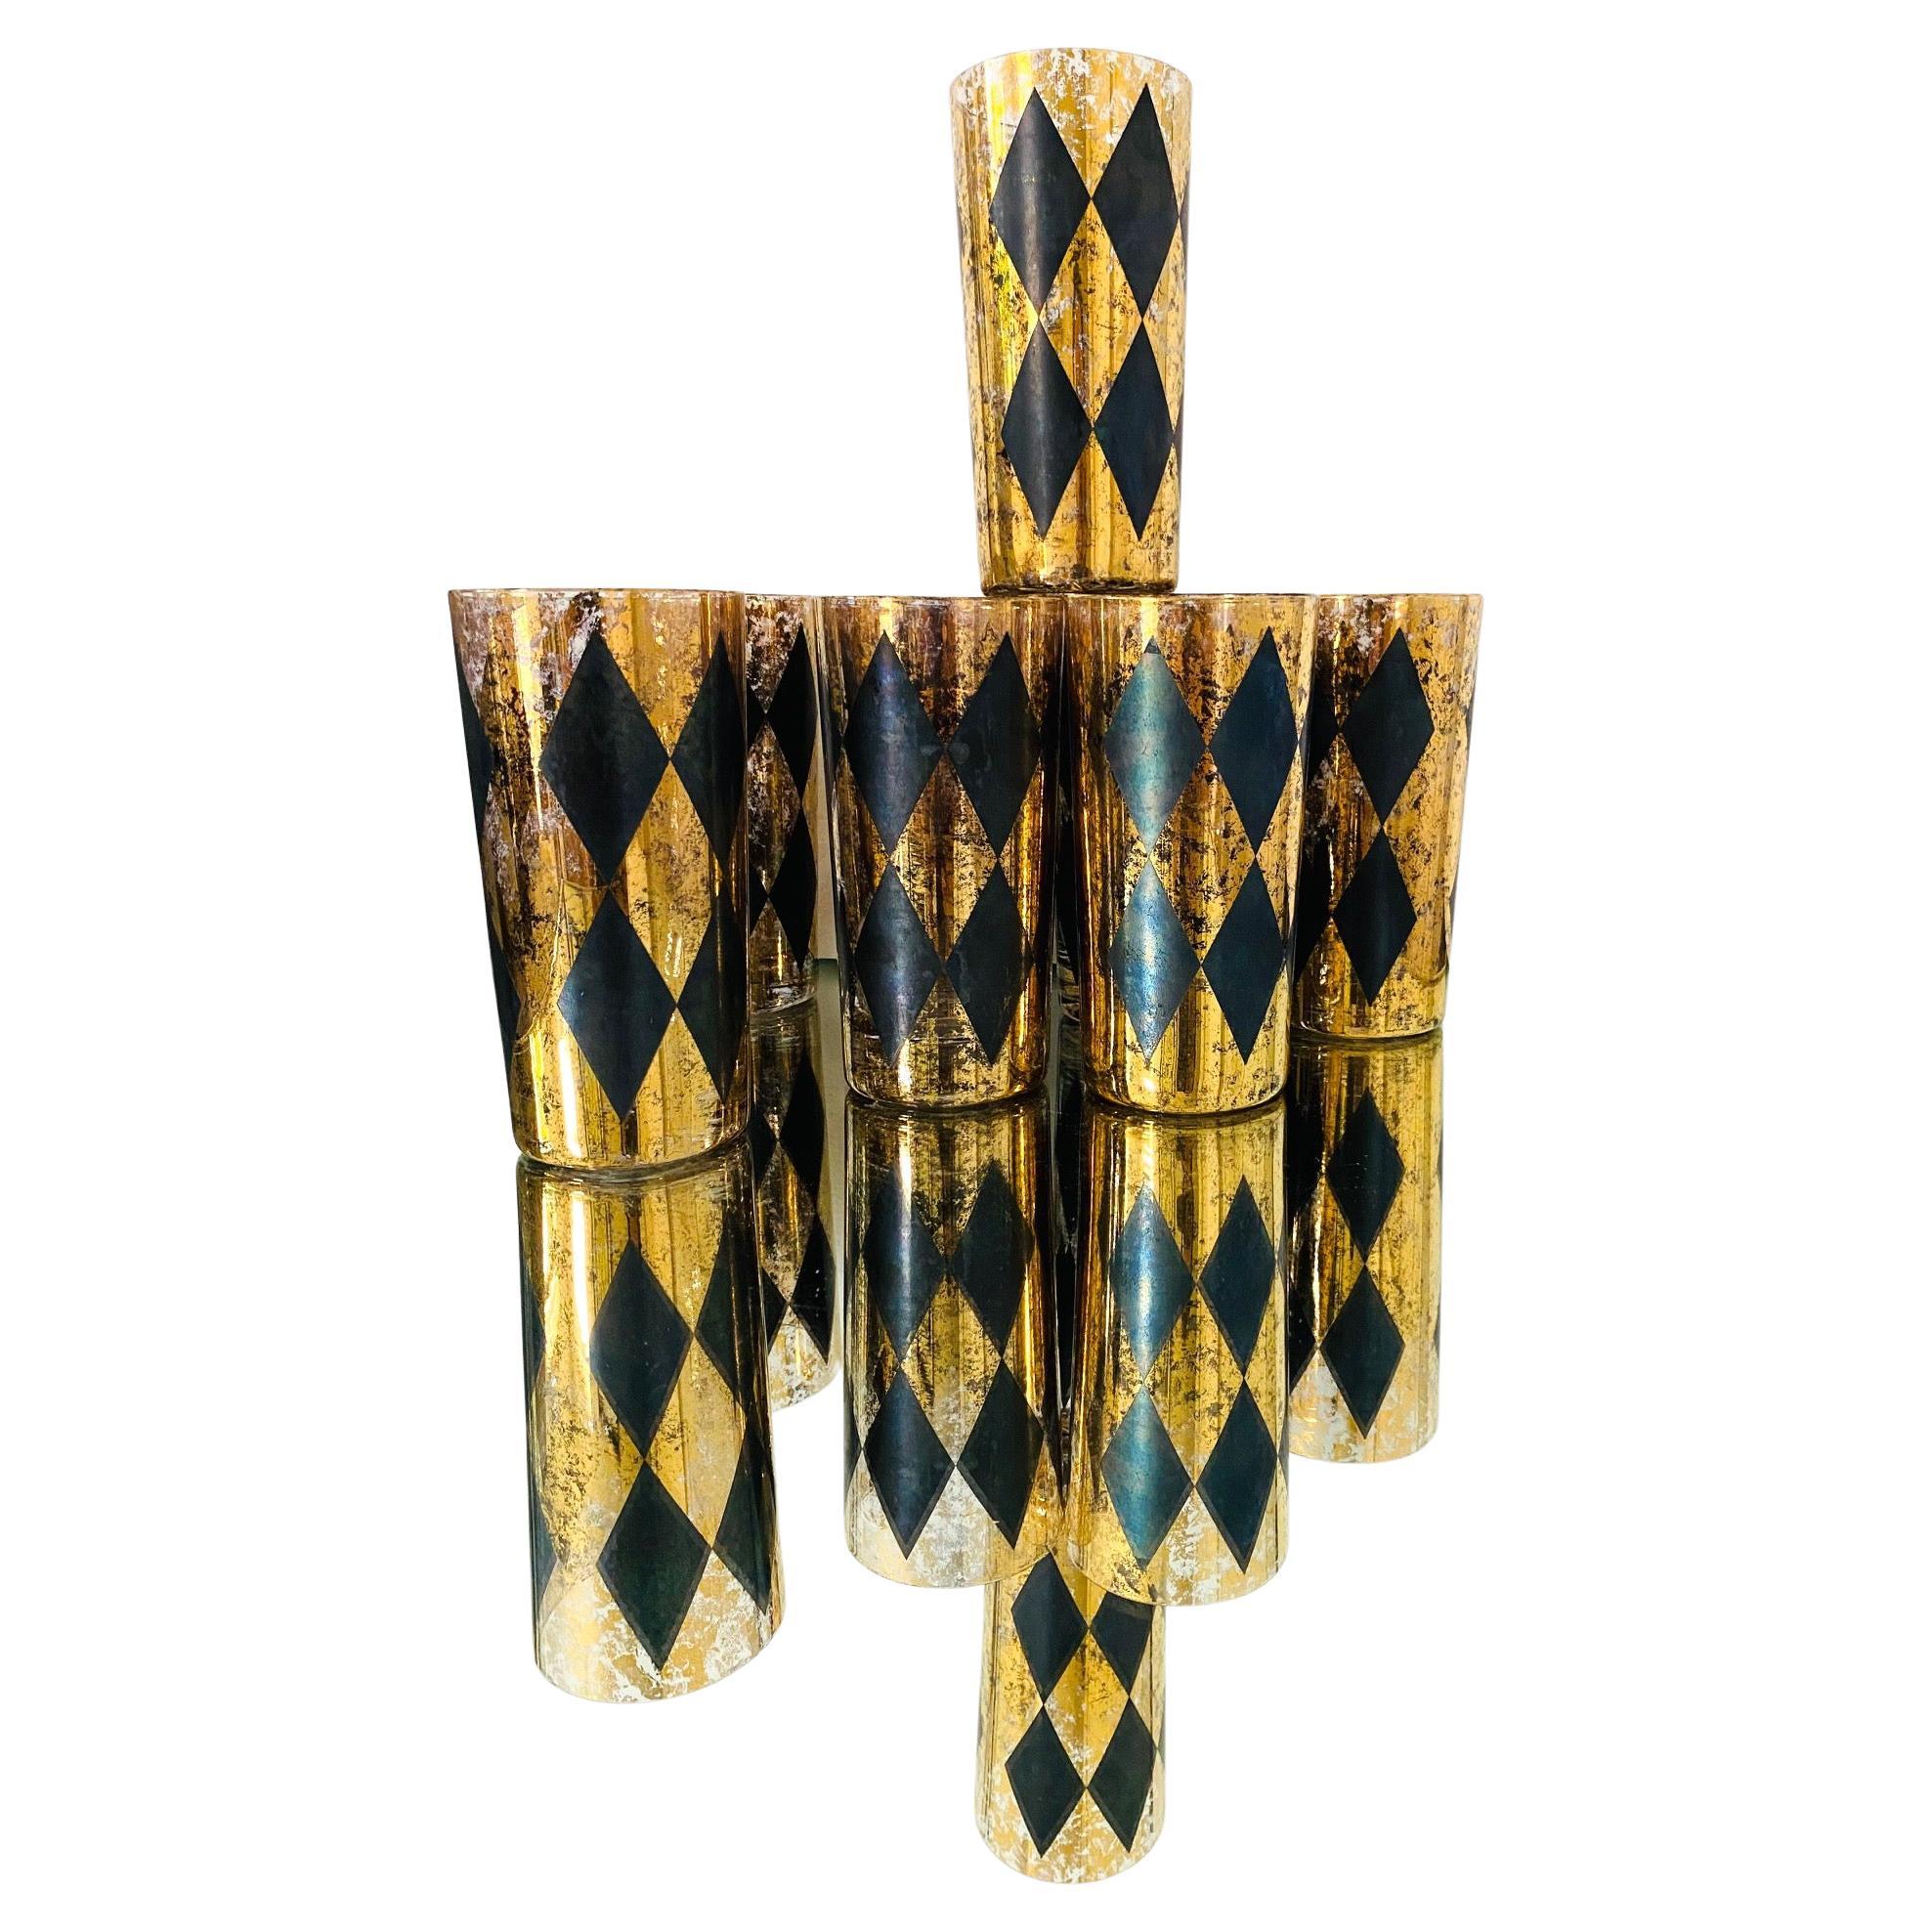 Set of Eight Harlequin Black and Gold Leaf Diamond Highball Glasses, circa 1960s For Sale 2